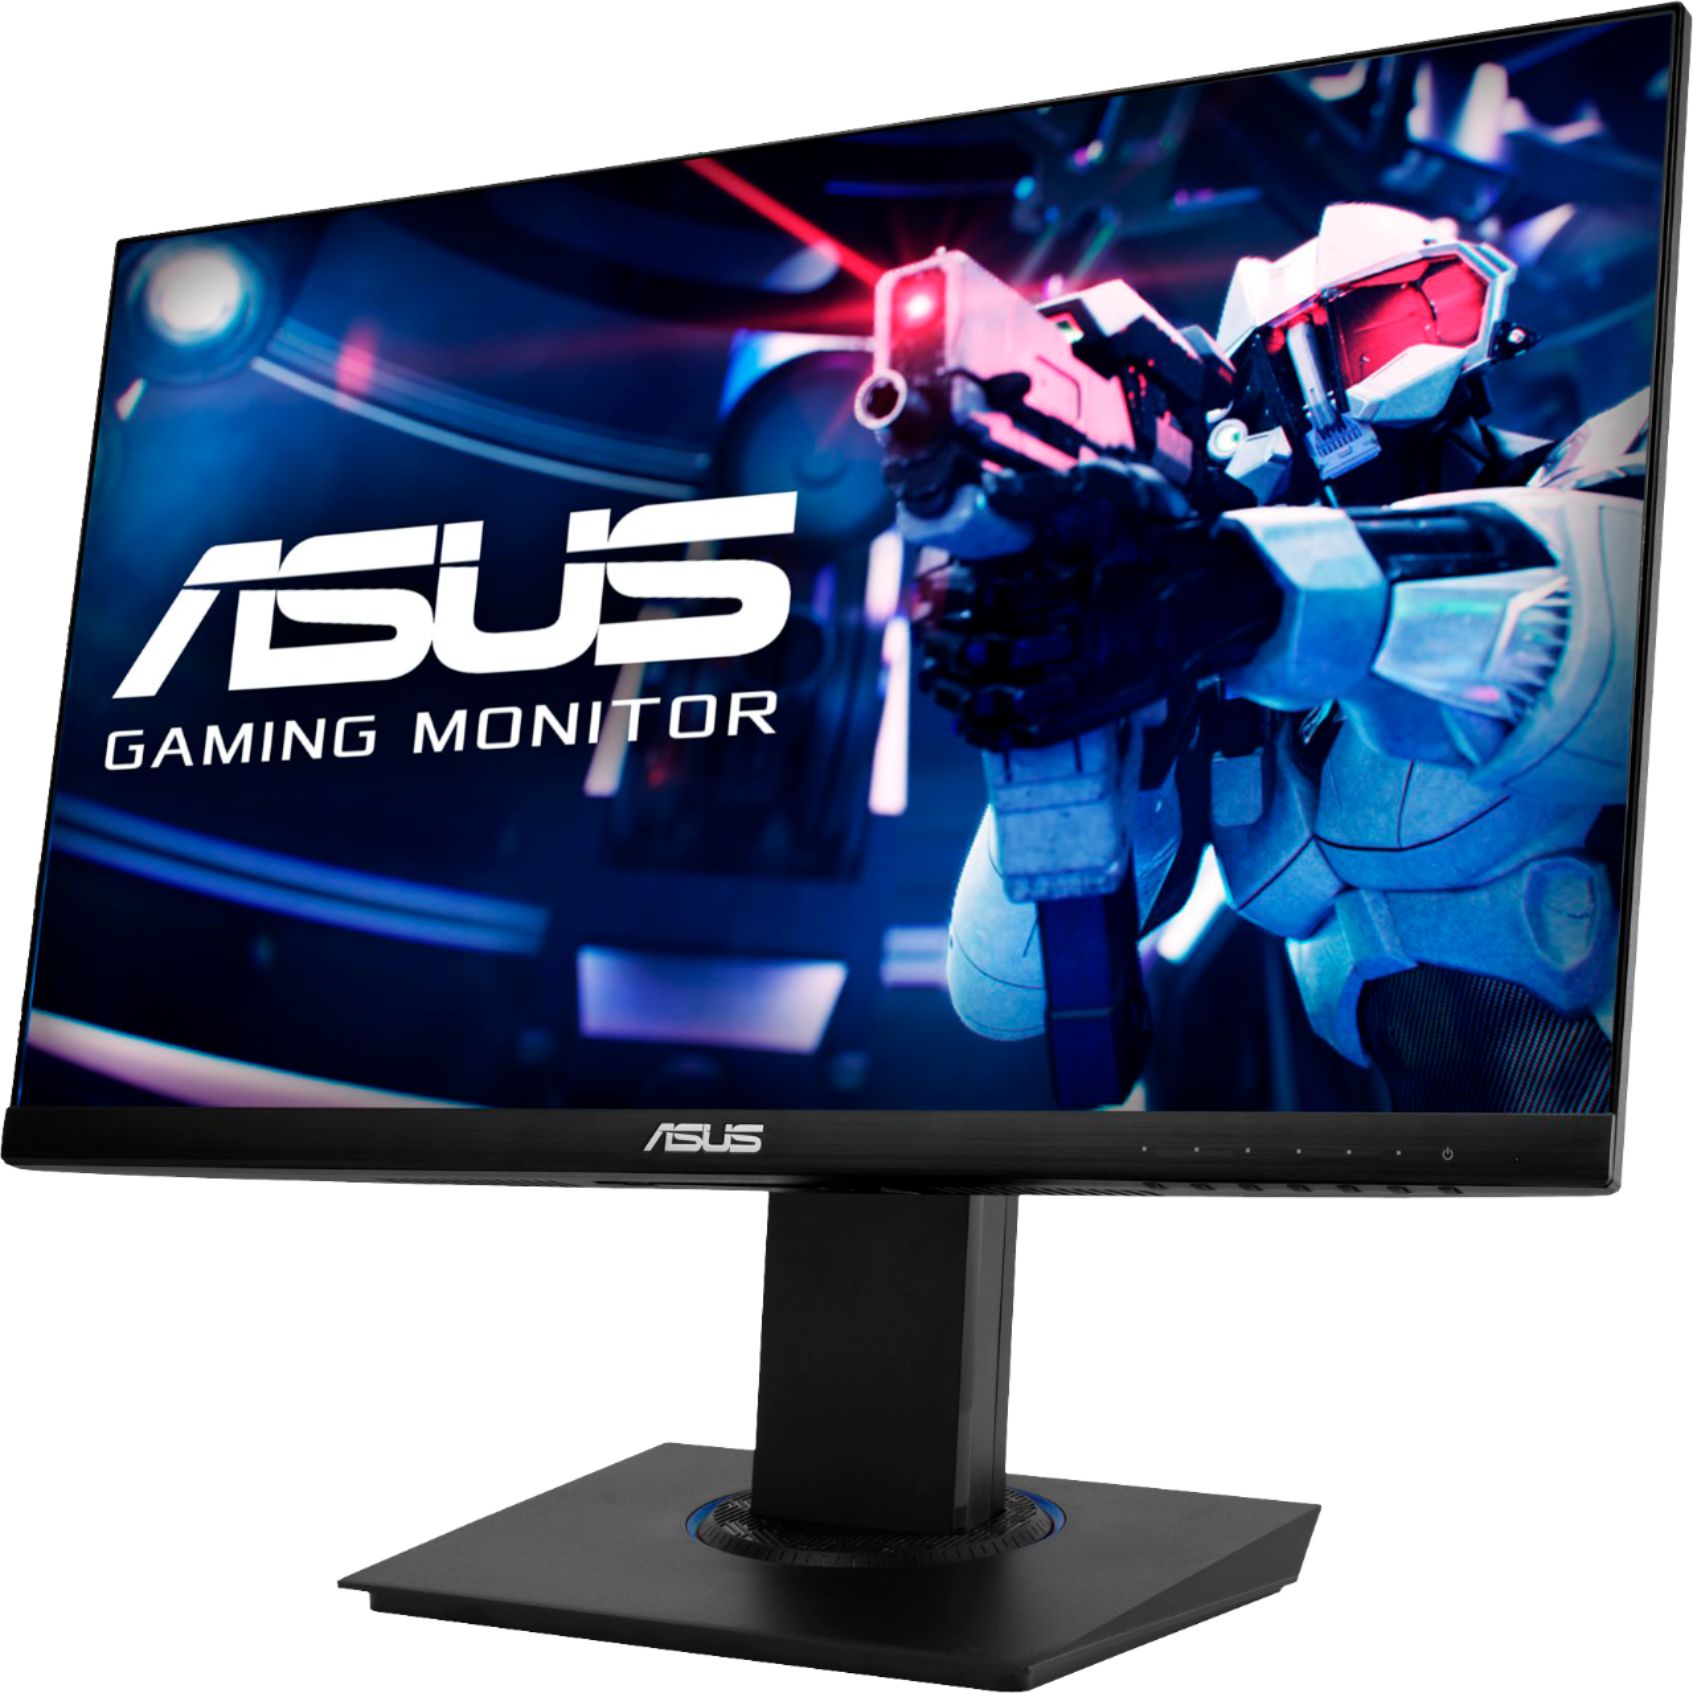 Angle View: ASUS - Geek Squad Certified Refurbished 23.8" IPS LED FHD FreeSync Monitor - Black